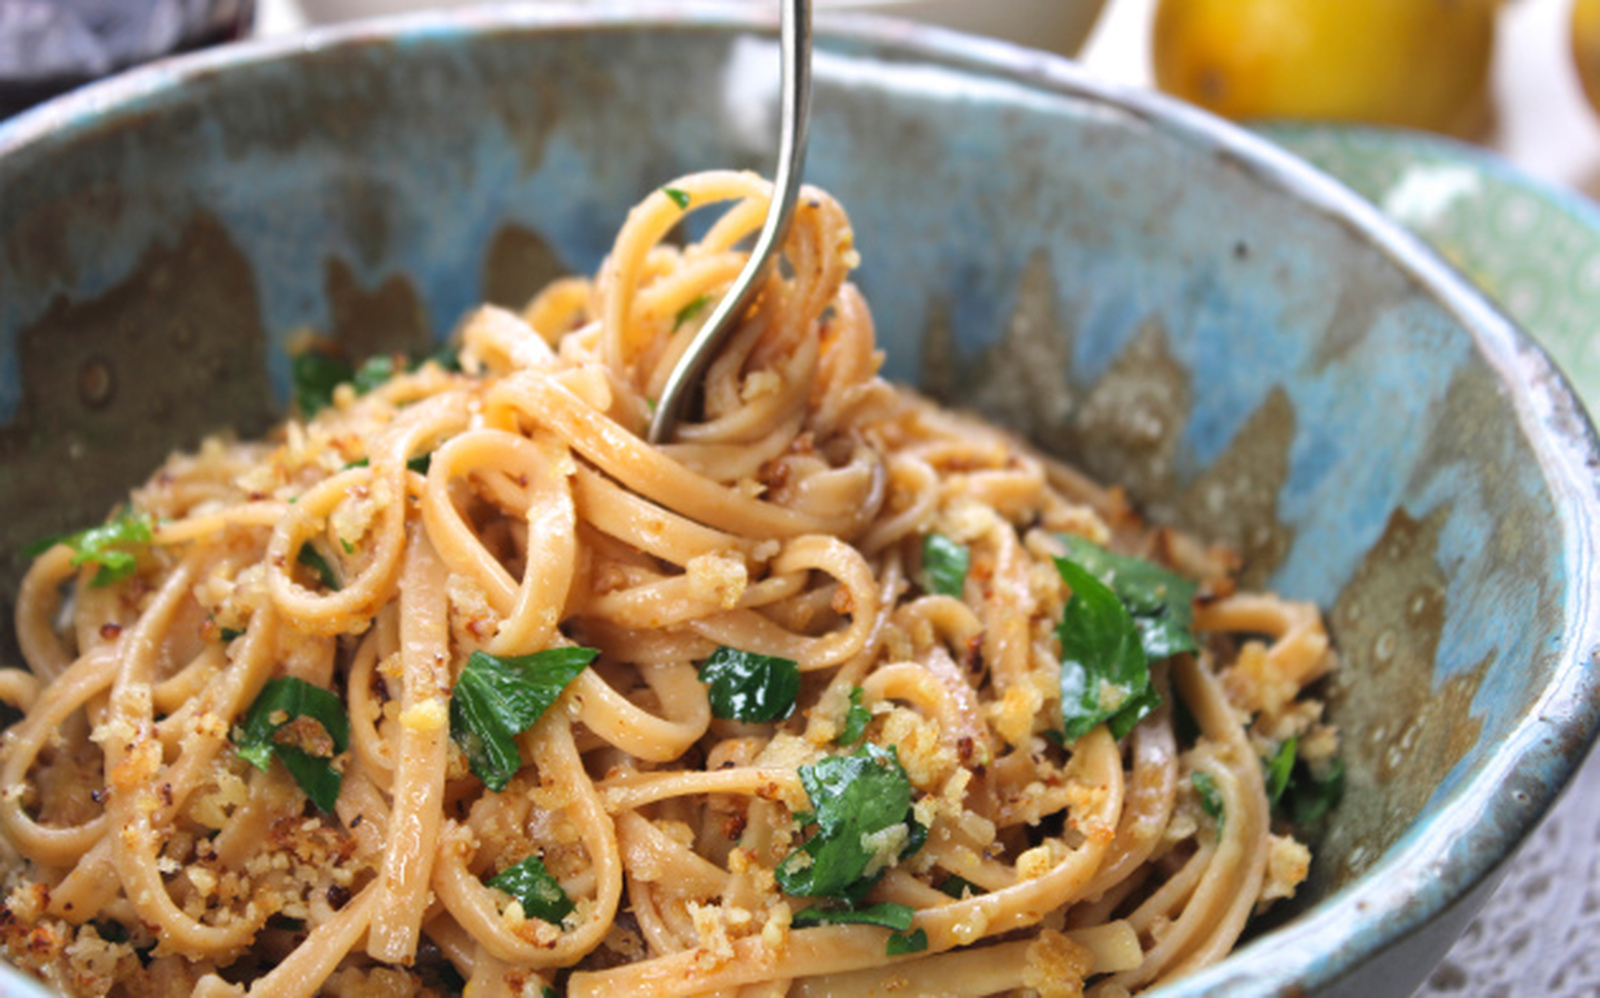 Lemon And Walnut Linguine With Roasted Broccoli Vegan One Green Planet,Coffee And Espresso Maker